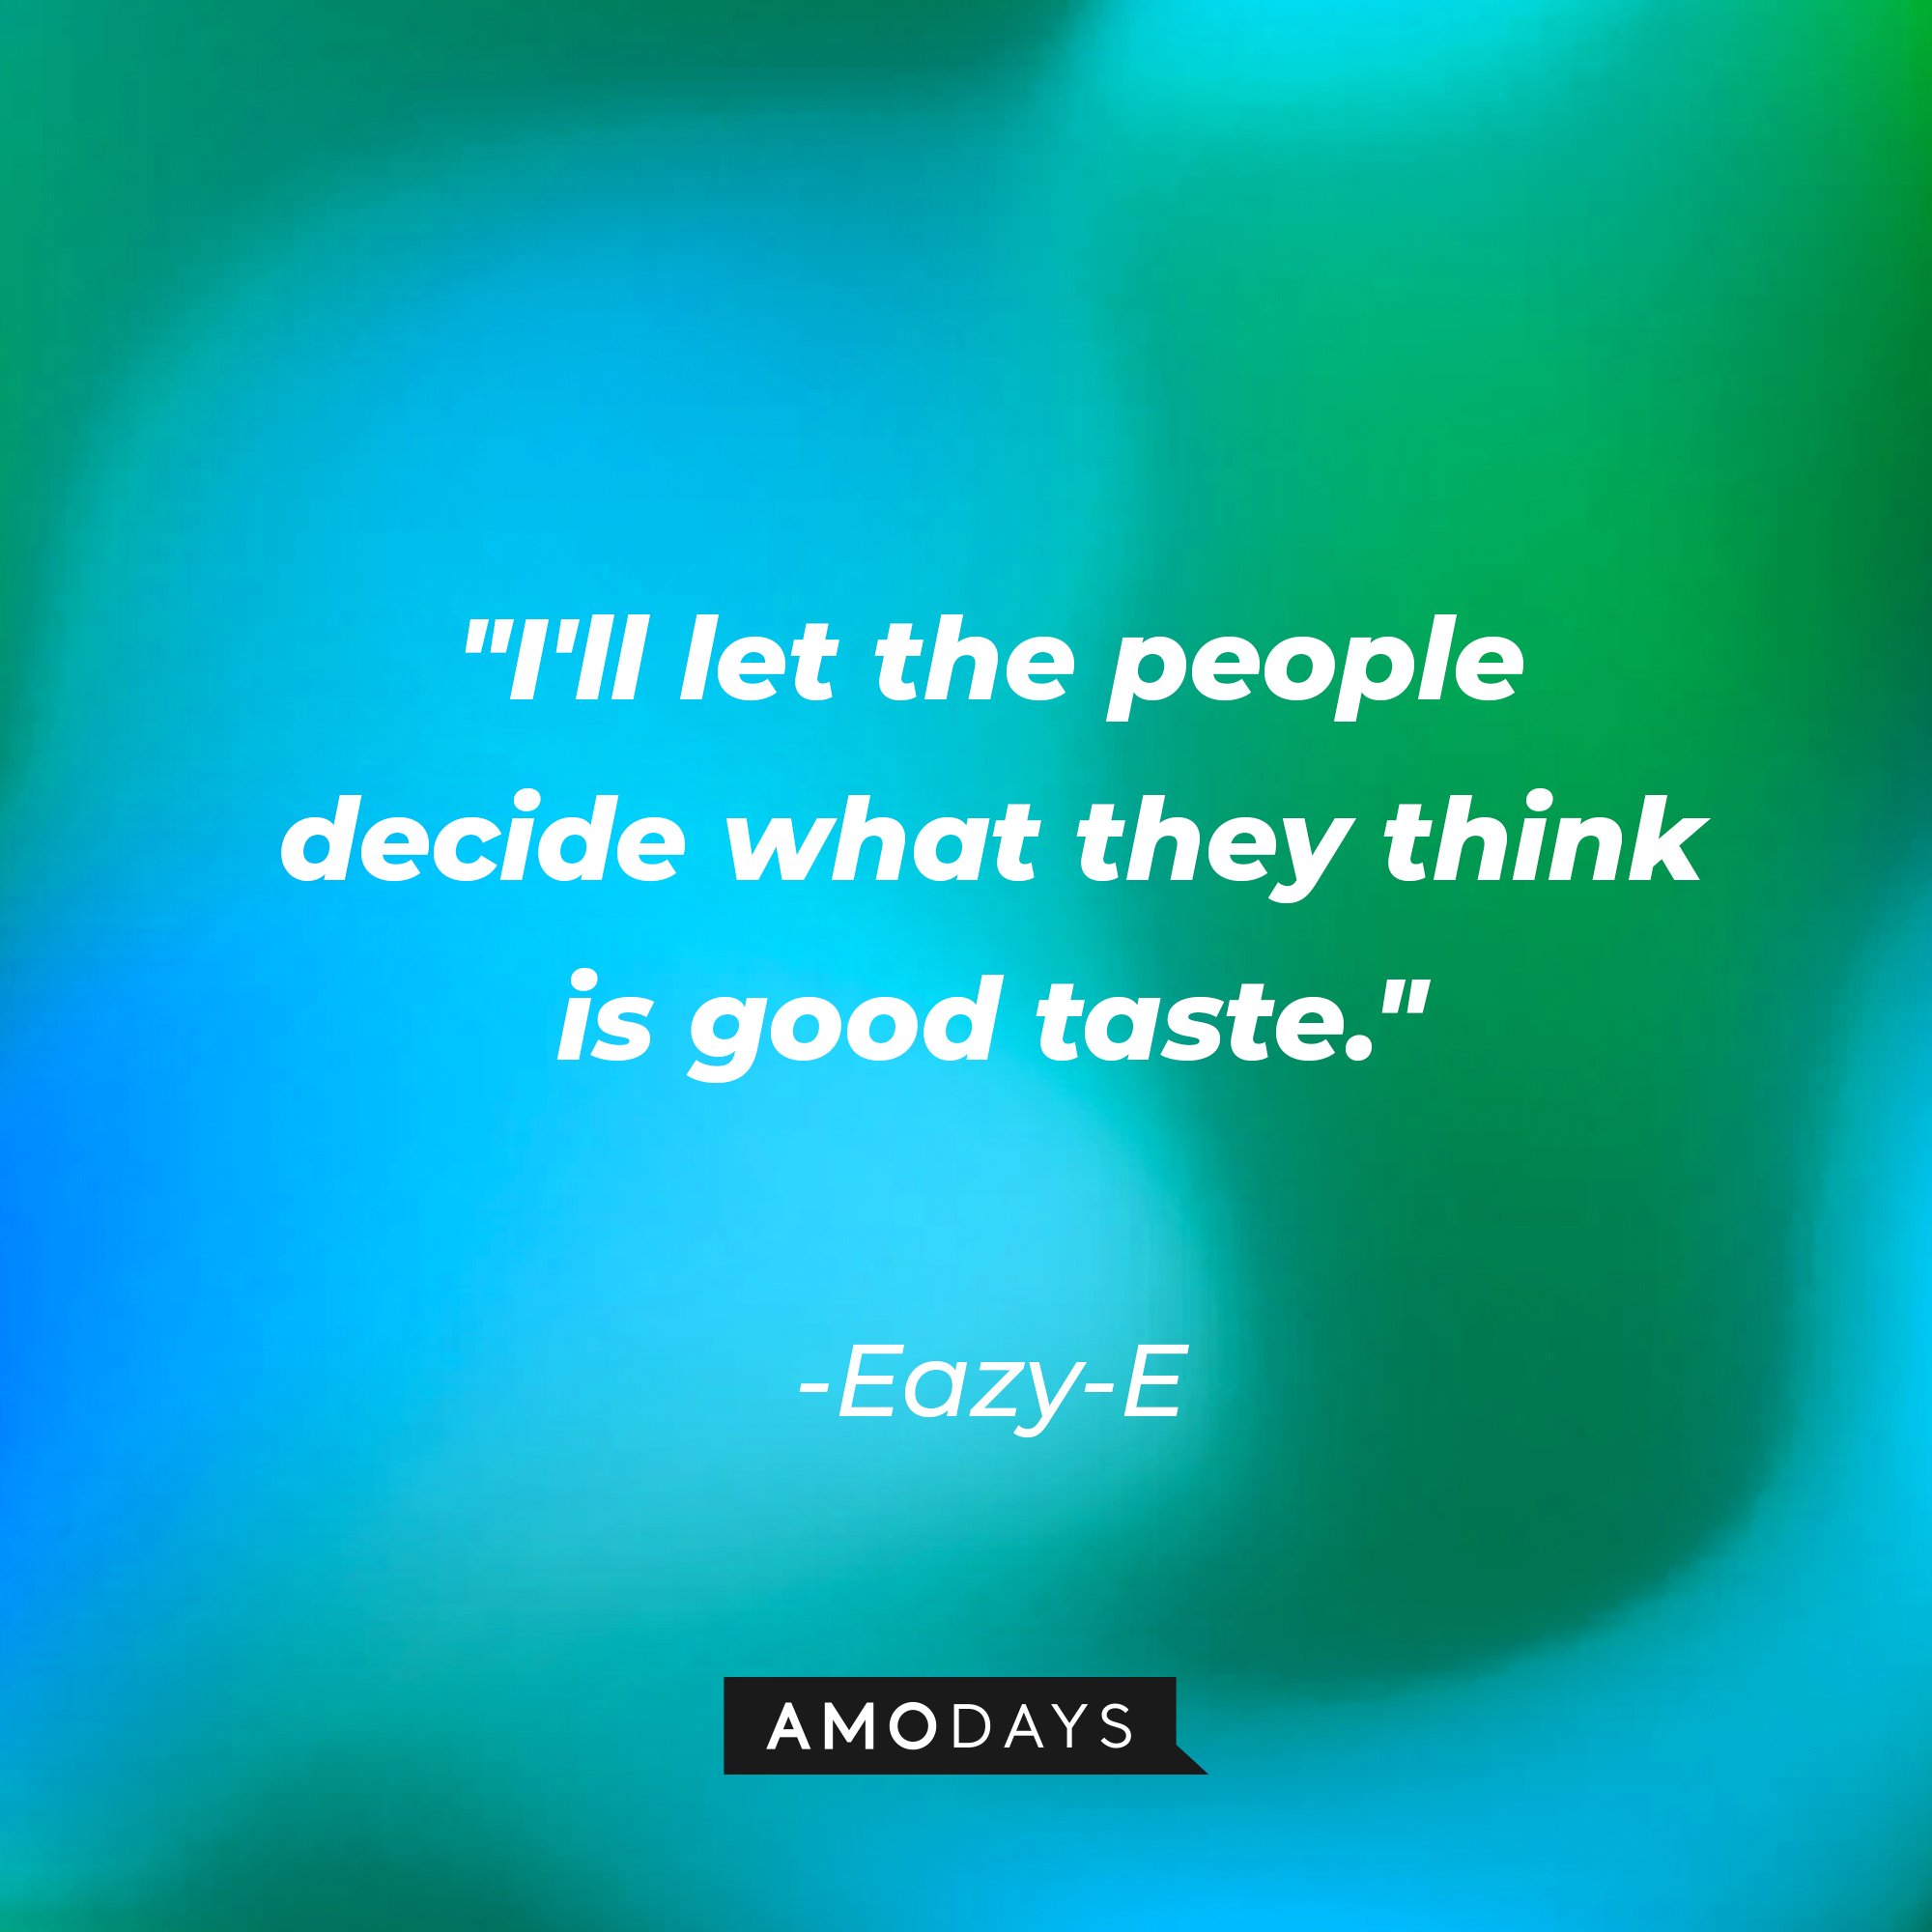 Eazy-E's quote: "I'll let the people decide what they think is good taste." | Image: AmoDays